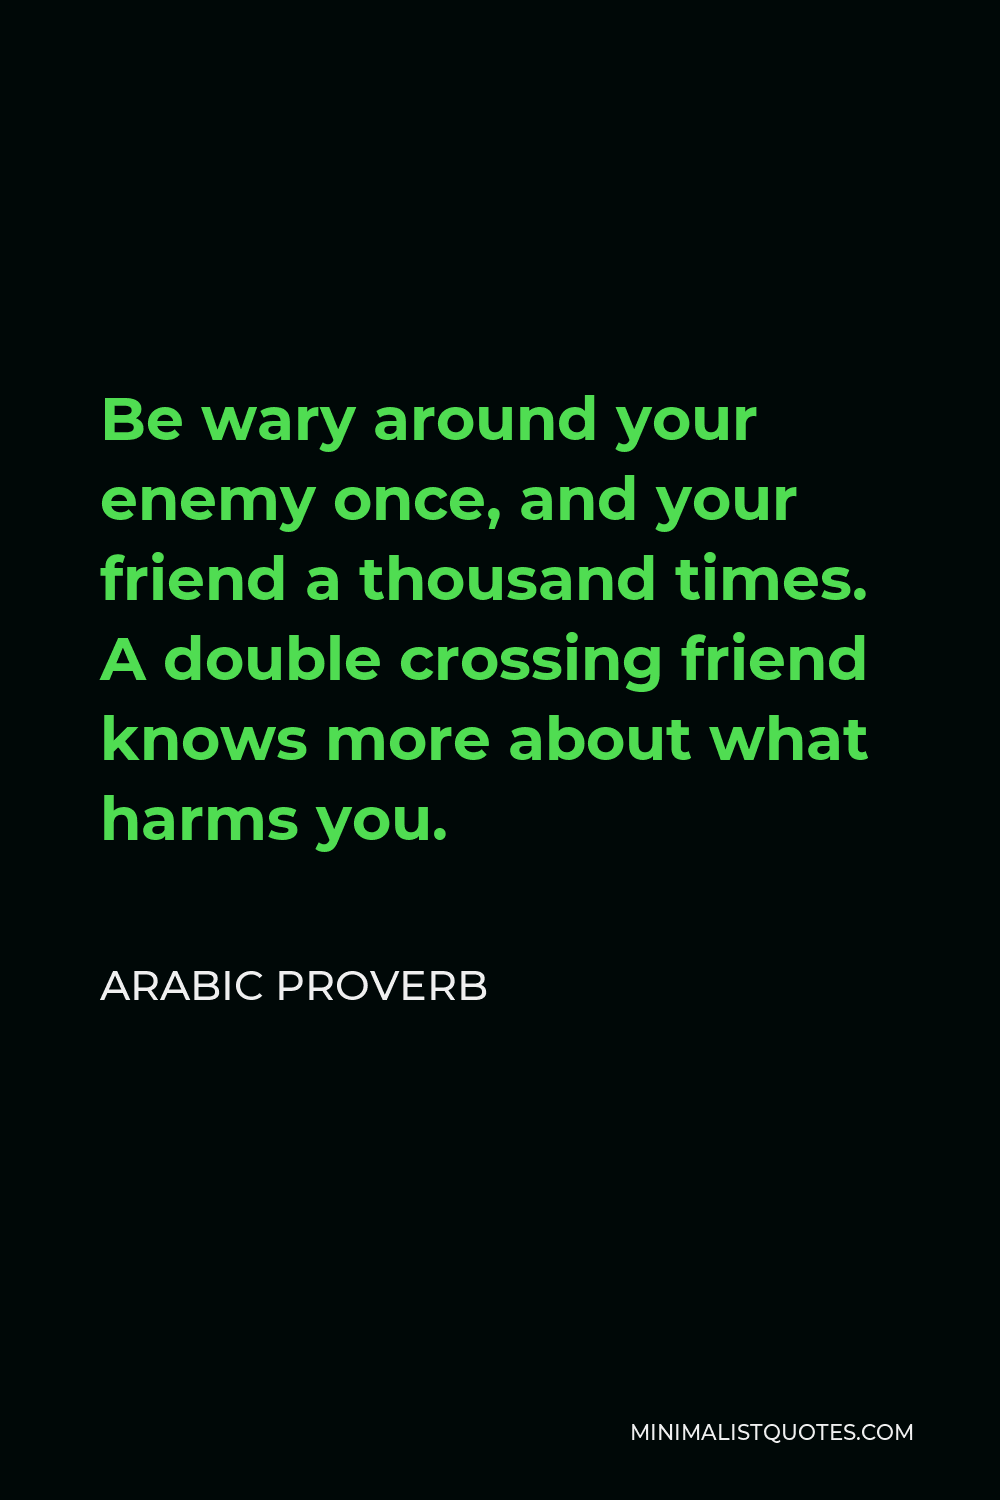 Arabic Proverb Quote - Be wary around your enemy once, and your friend a thousand times. A double crossing friend knows more about what harms you.